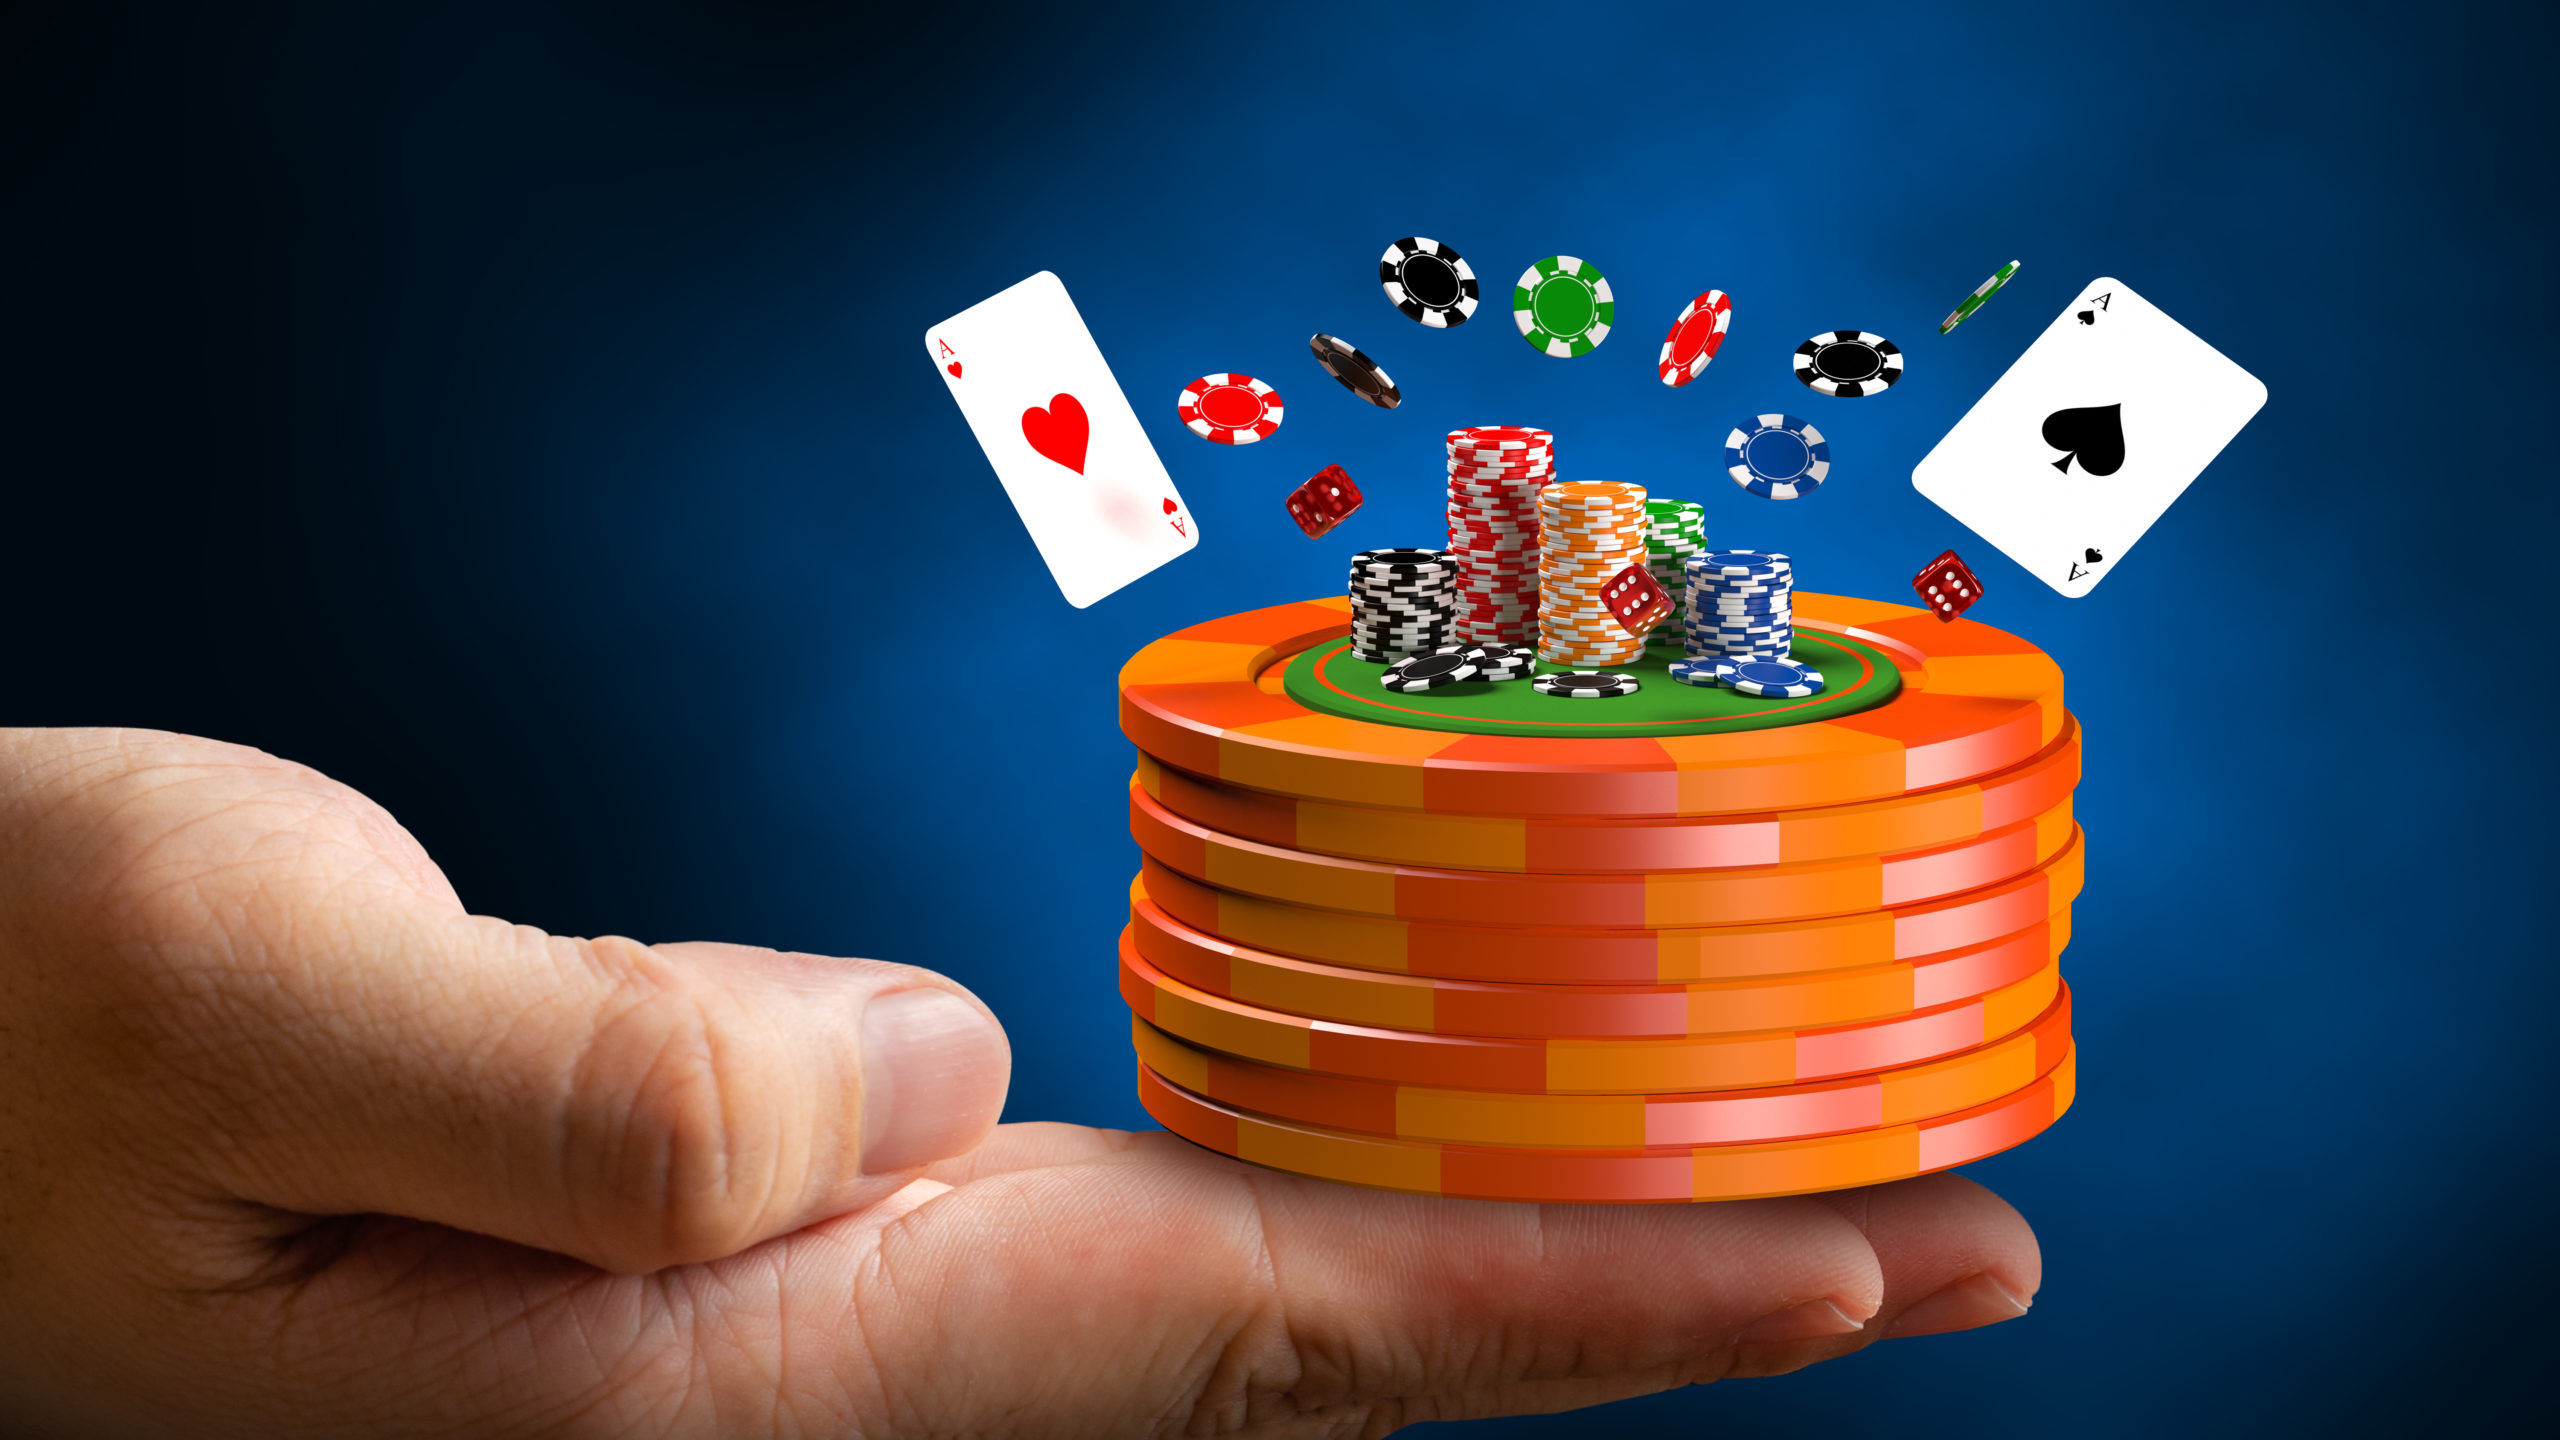 Mastering The Way Of teen patti paytm cash Is Not An Accident - It's An Art